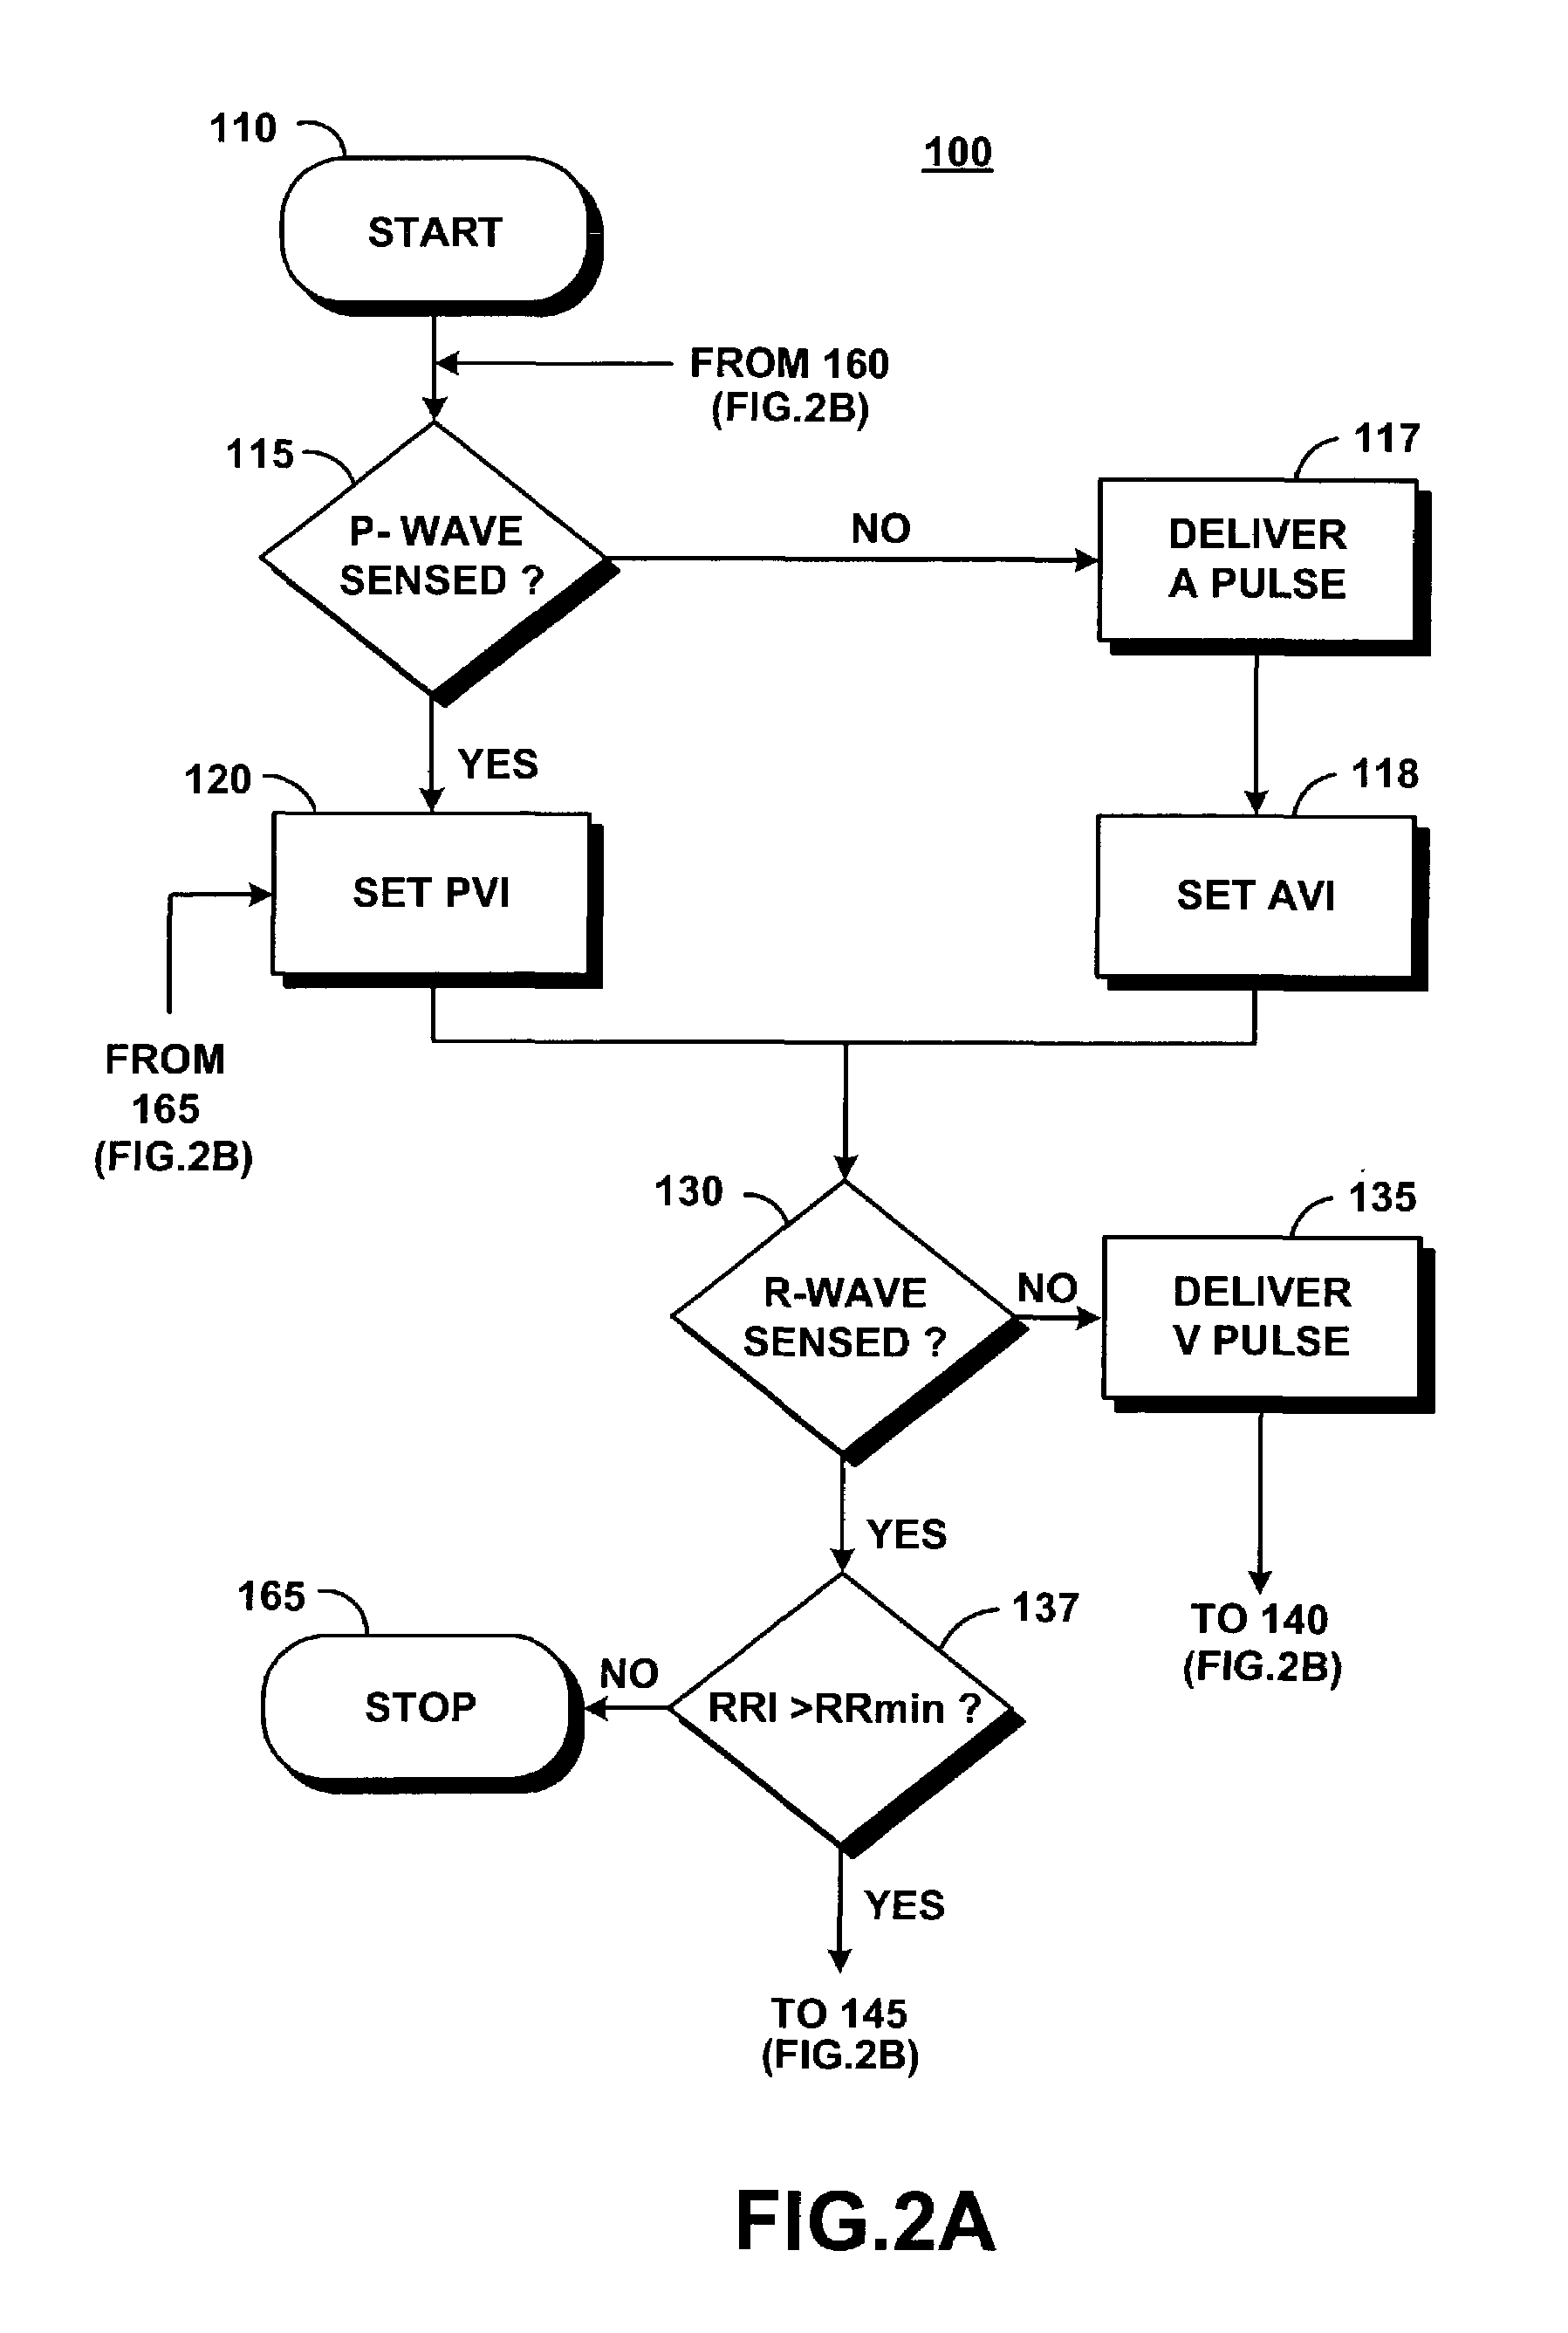 System and method for automatically and adaptively segmenting an atrial blanking period